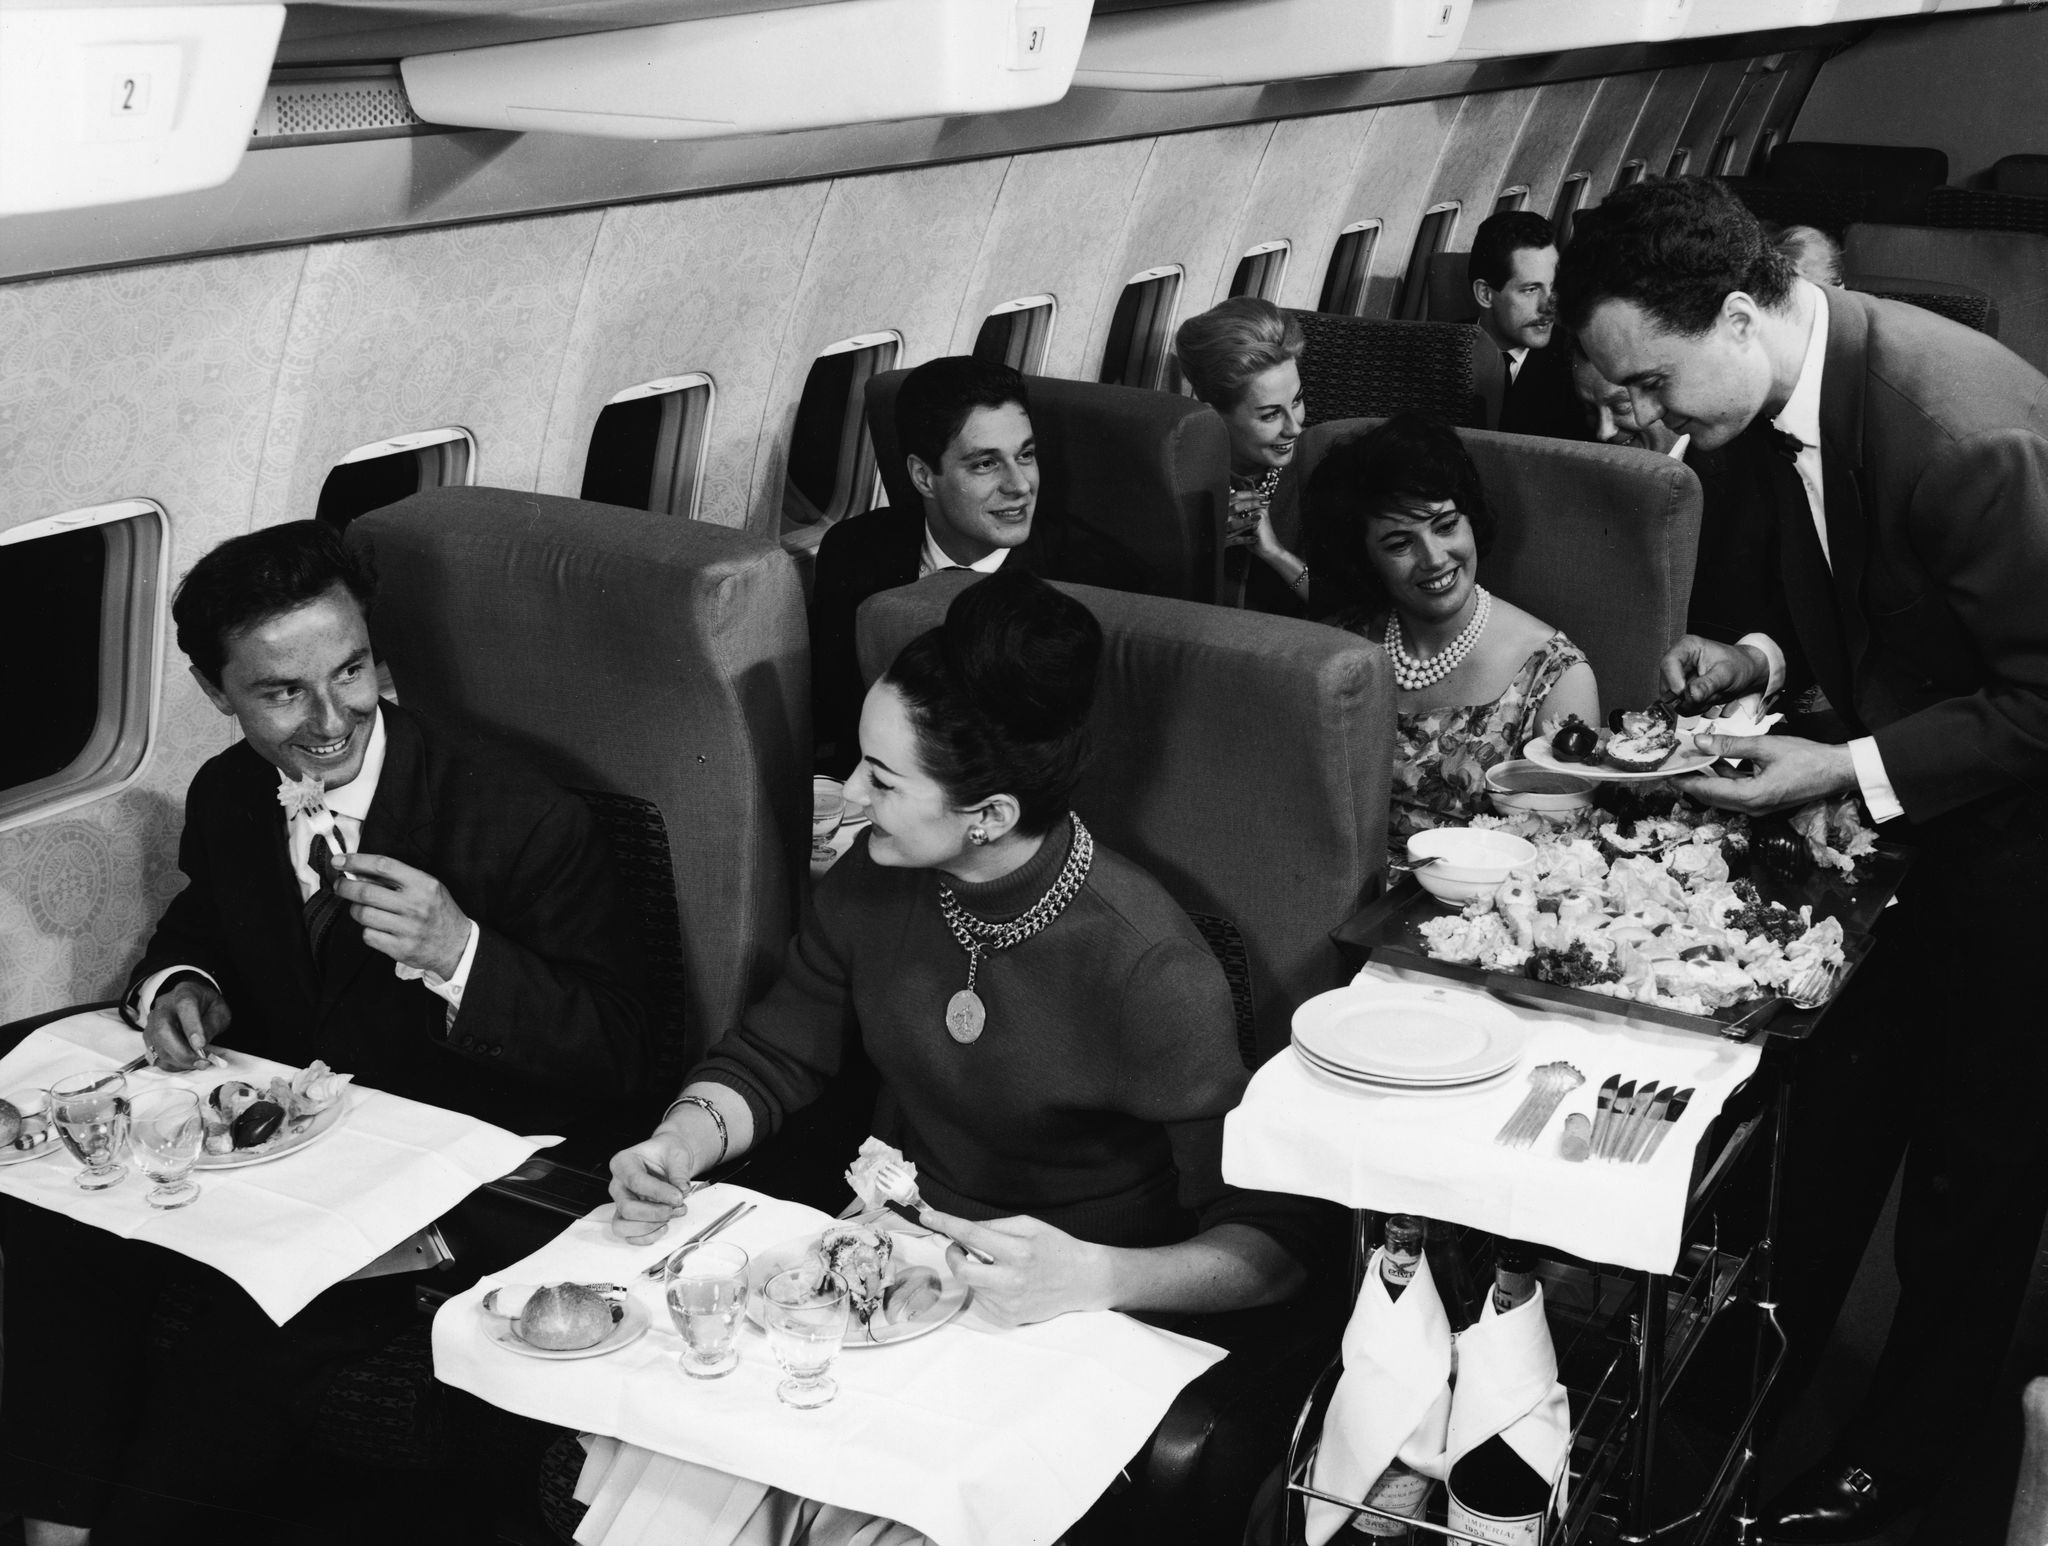 interior view of the first class compartment of a commercial passenger plane a boing shows, in the foreground, a well dressed couple as they smile and enjoy their meal, while behind them a flight attendant in a bow tie serves another happy couple, 1950s photo by authenticated newsgetty images